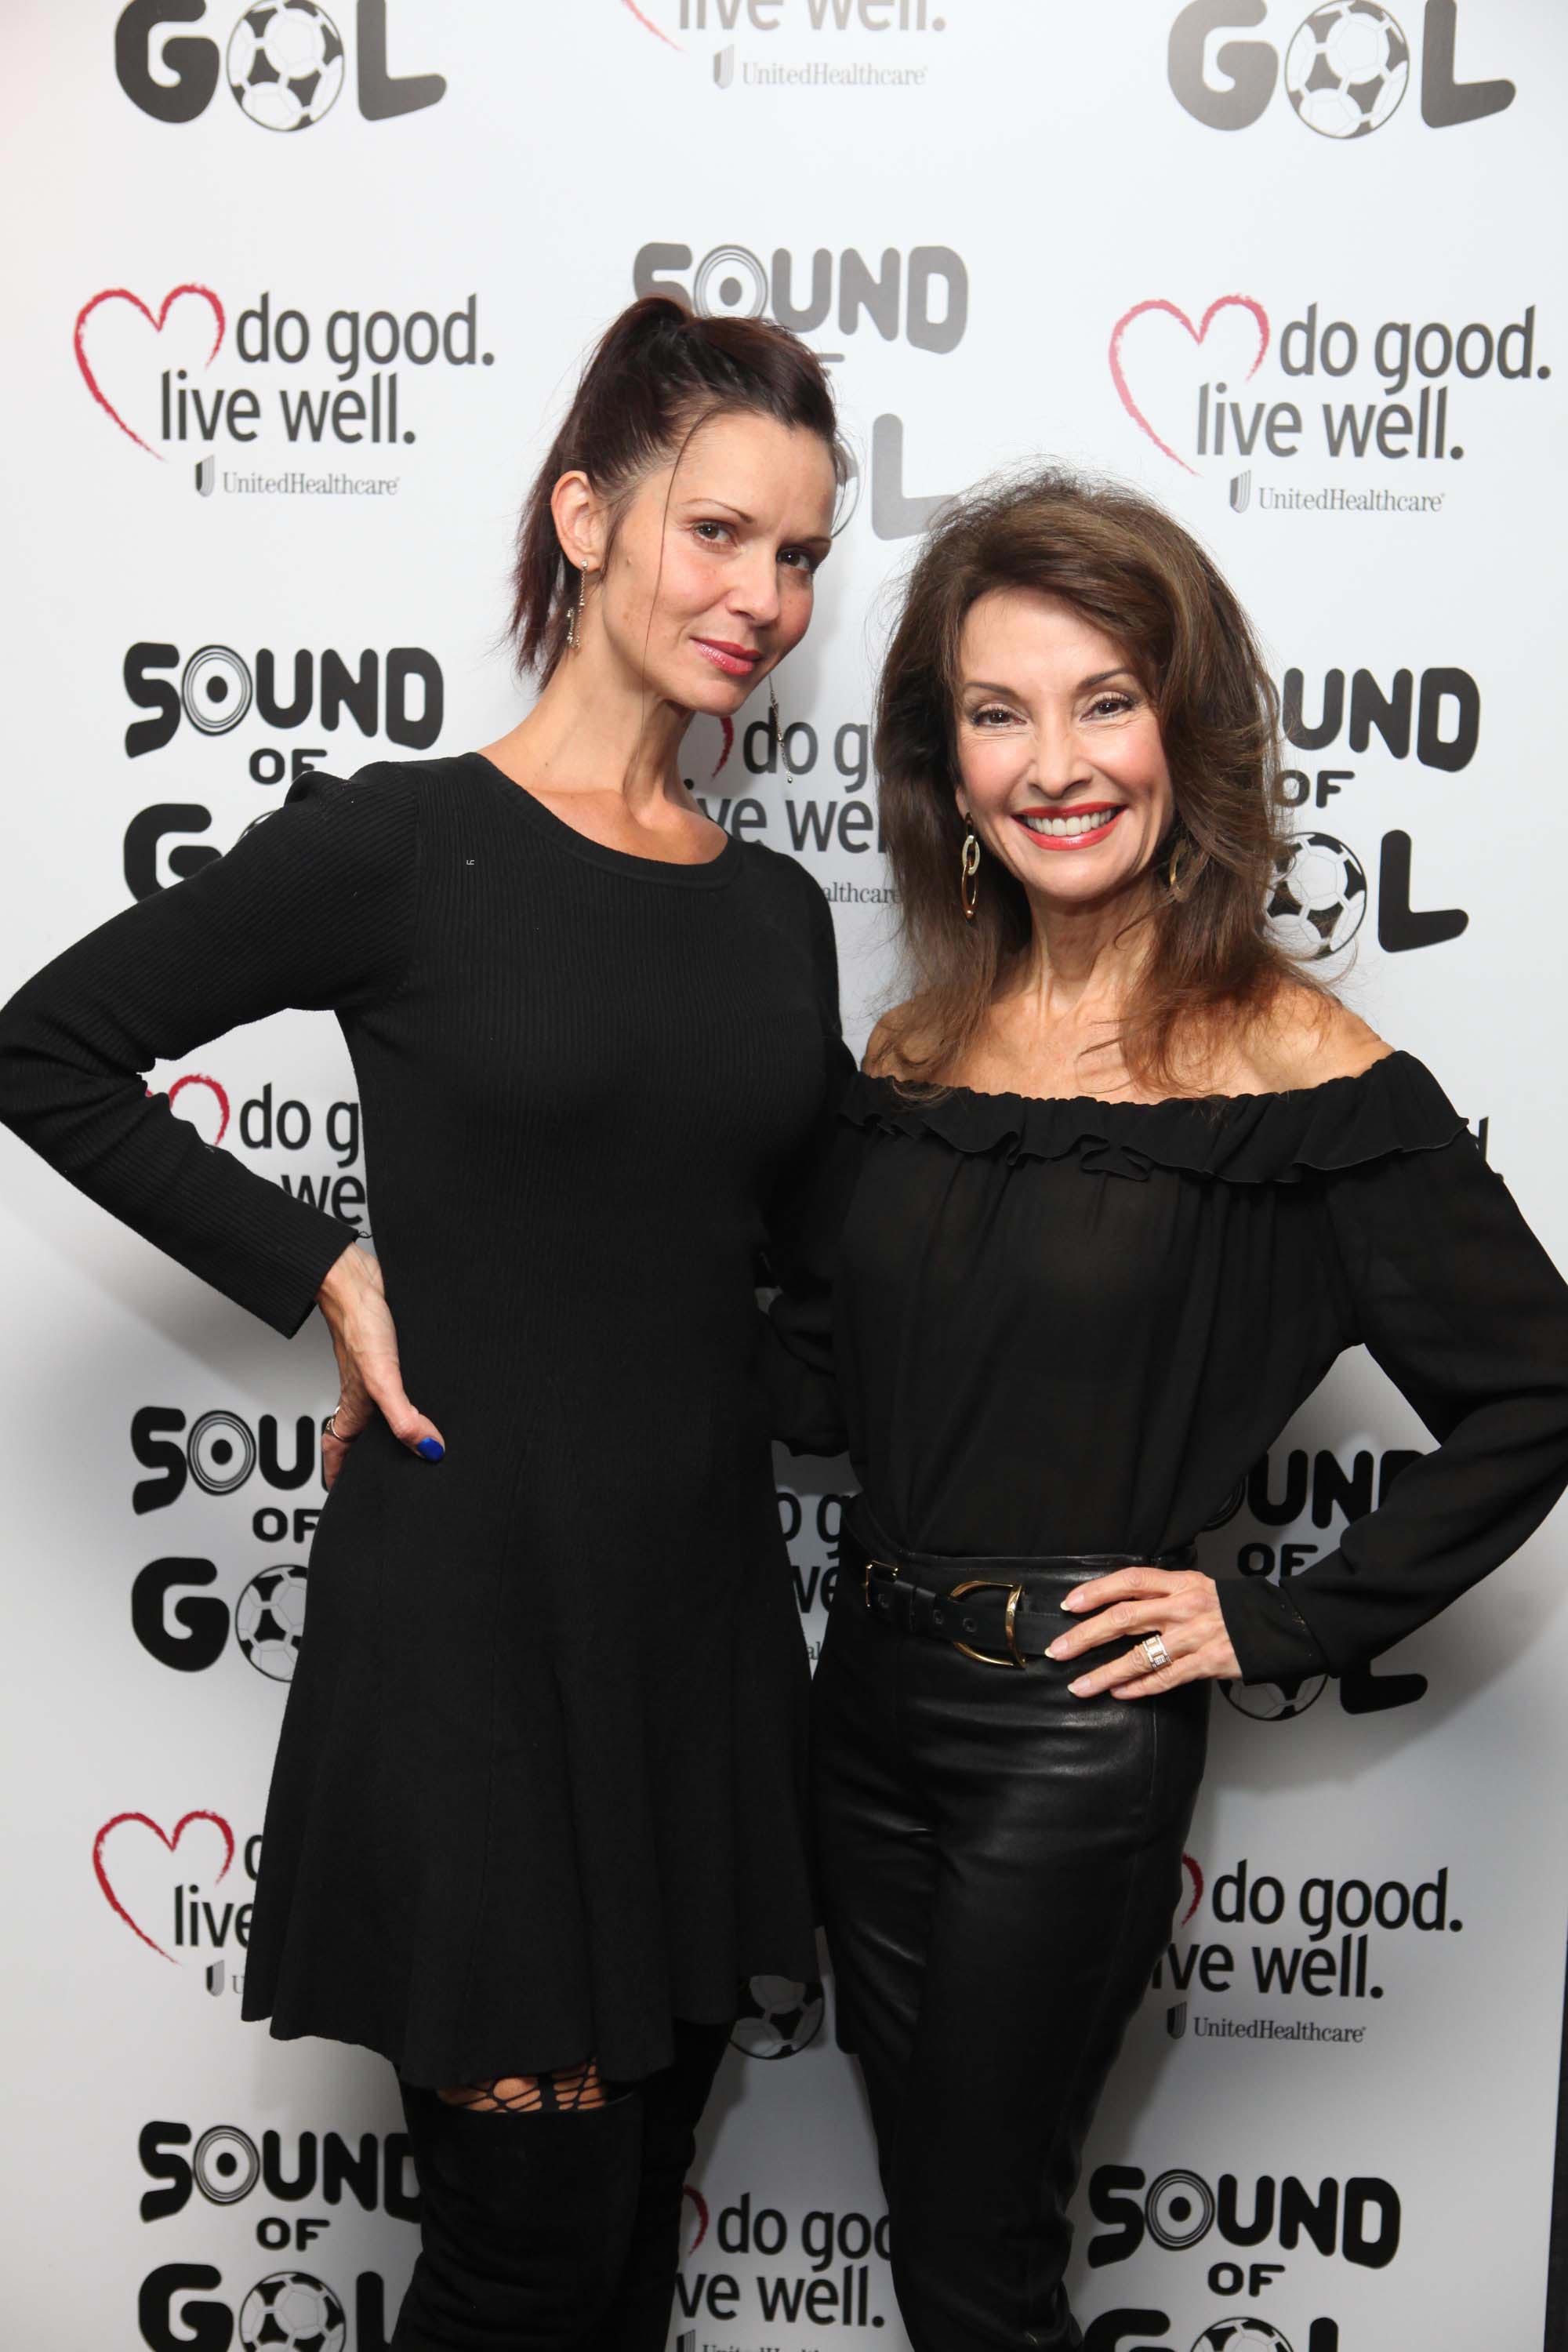 Susan Lucci attends the 2016 Sound of Gol Fundraiser